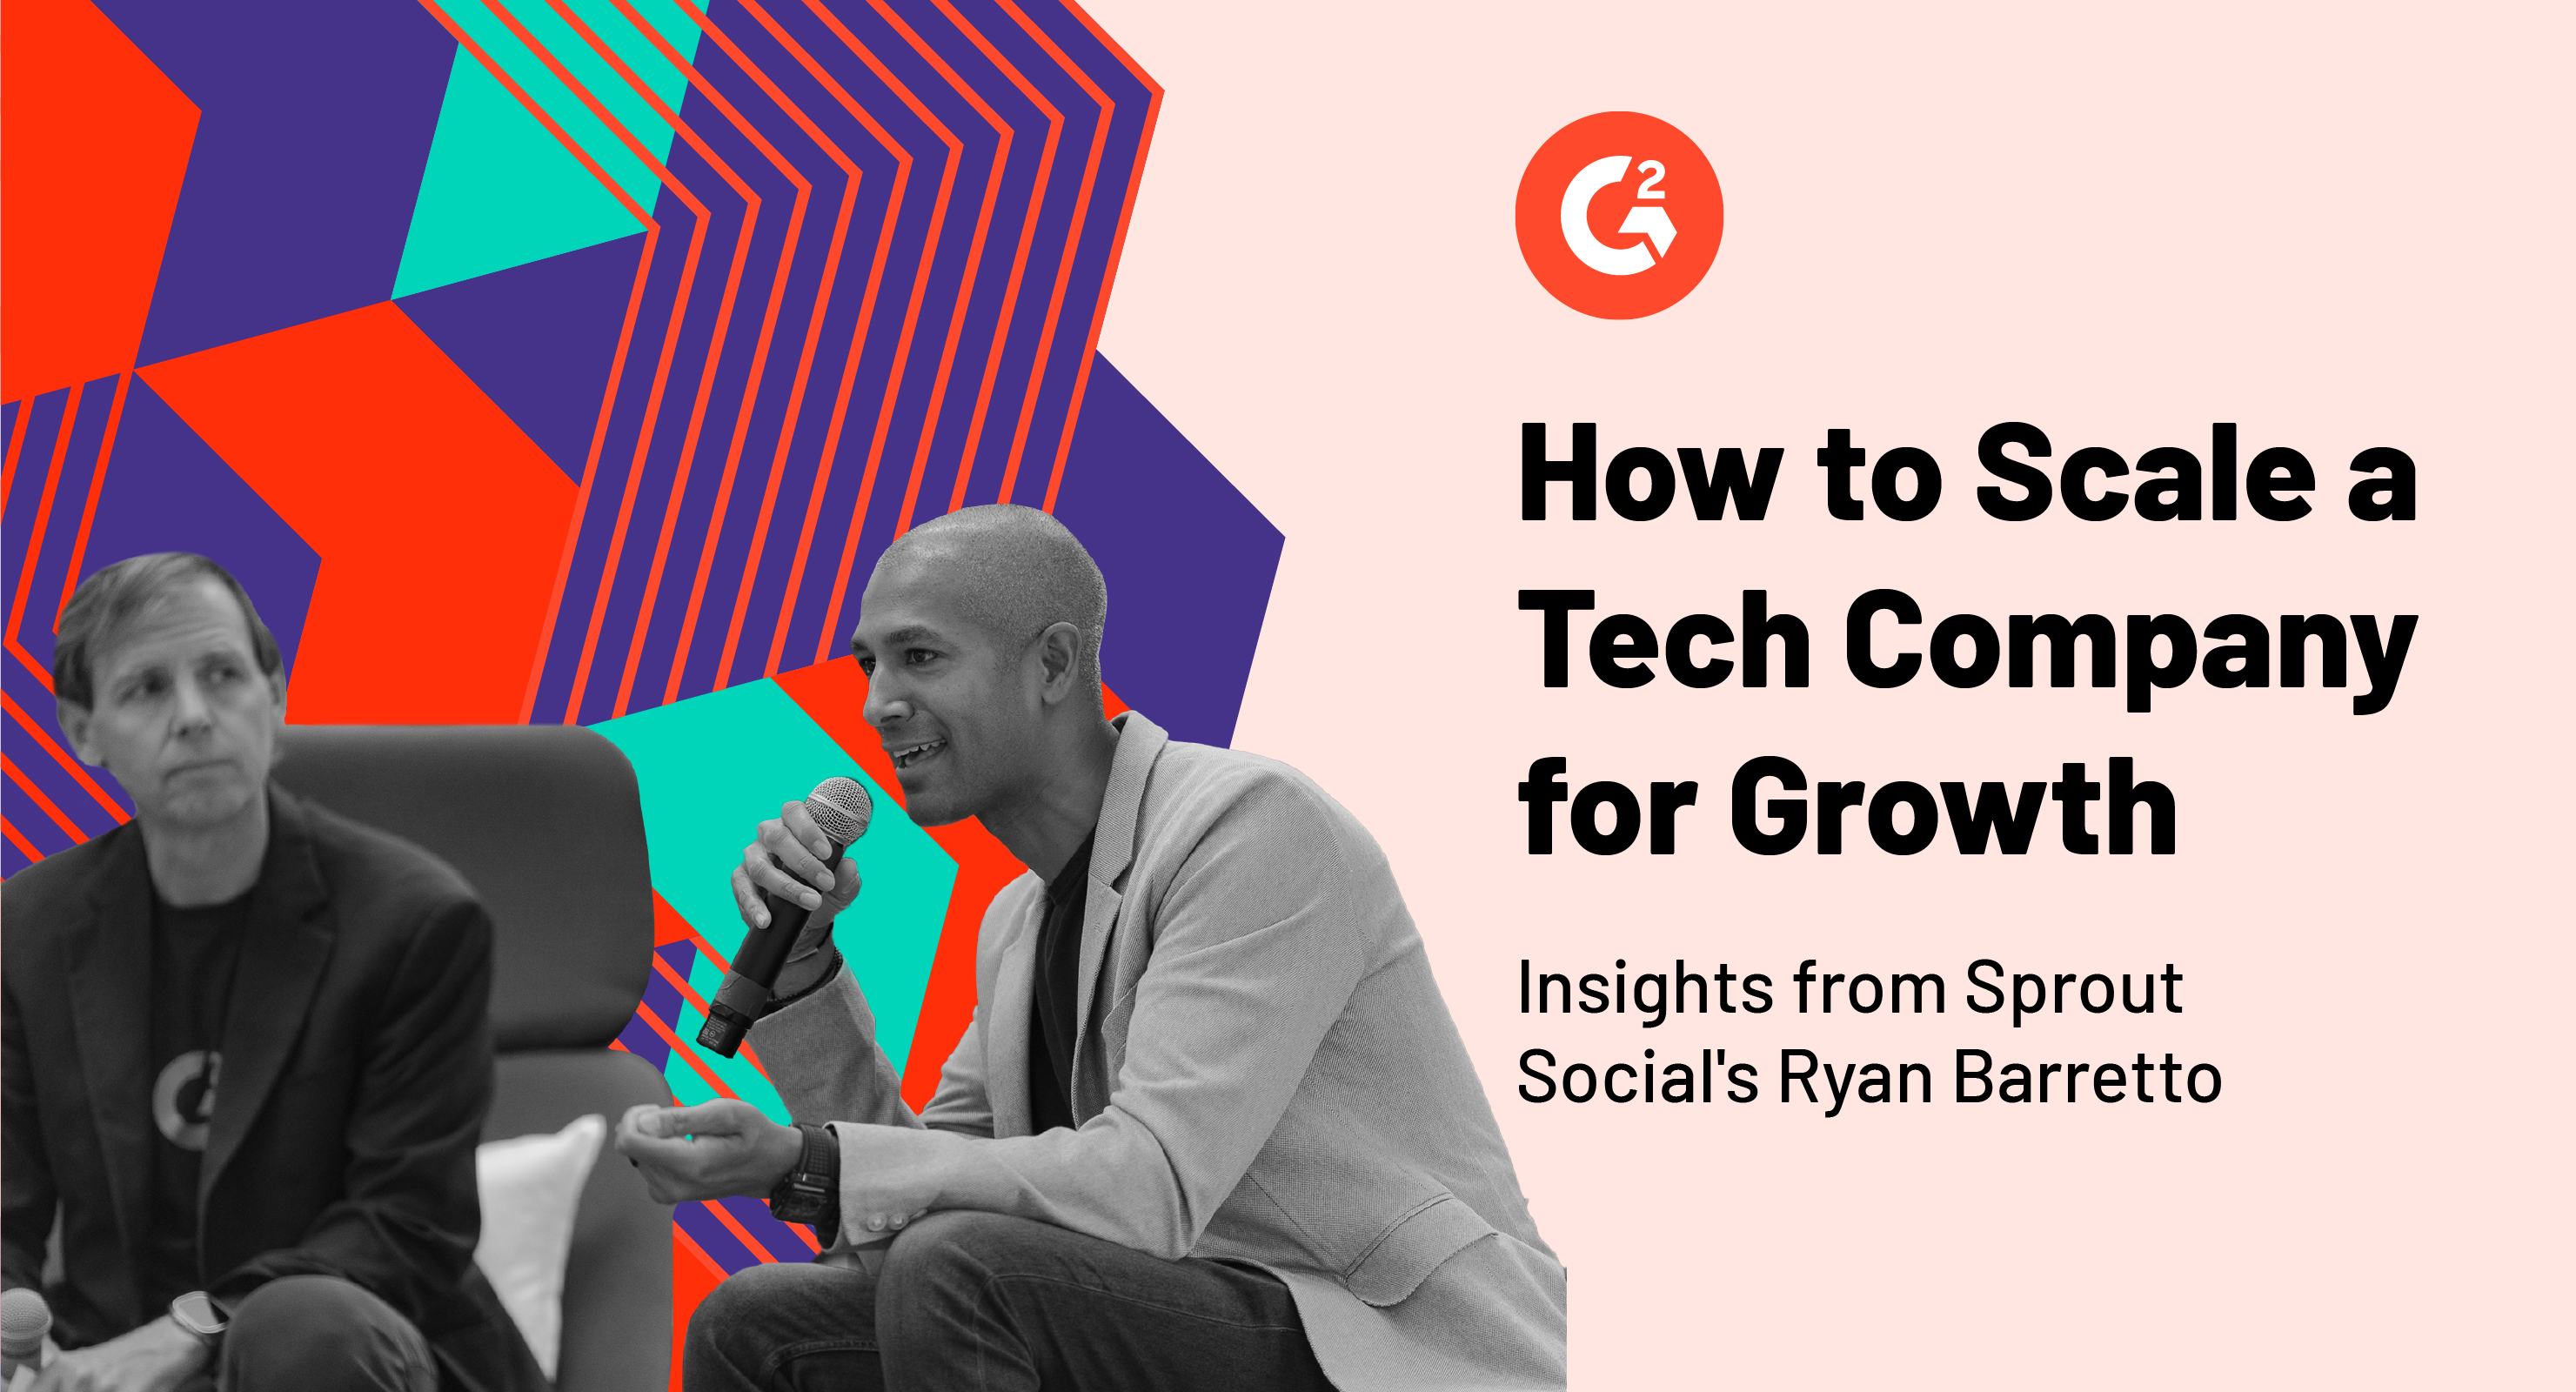 Sprout Social's Ryan Barretto on scaling a tech company for high growth